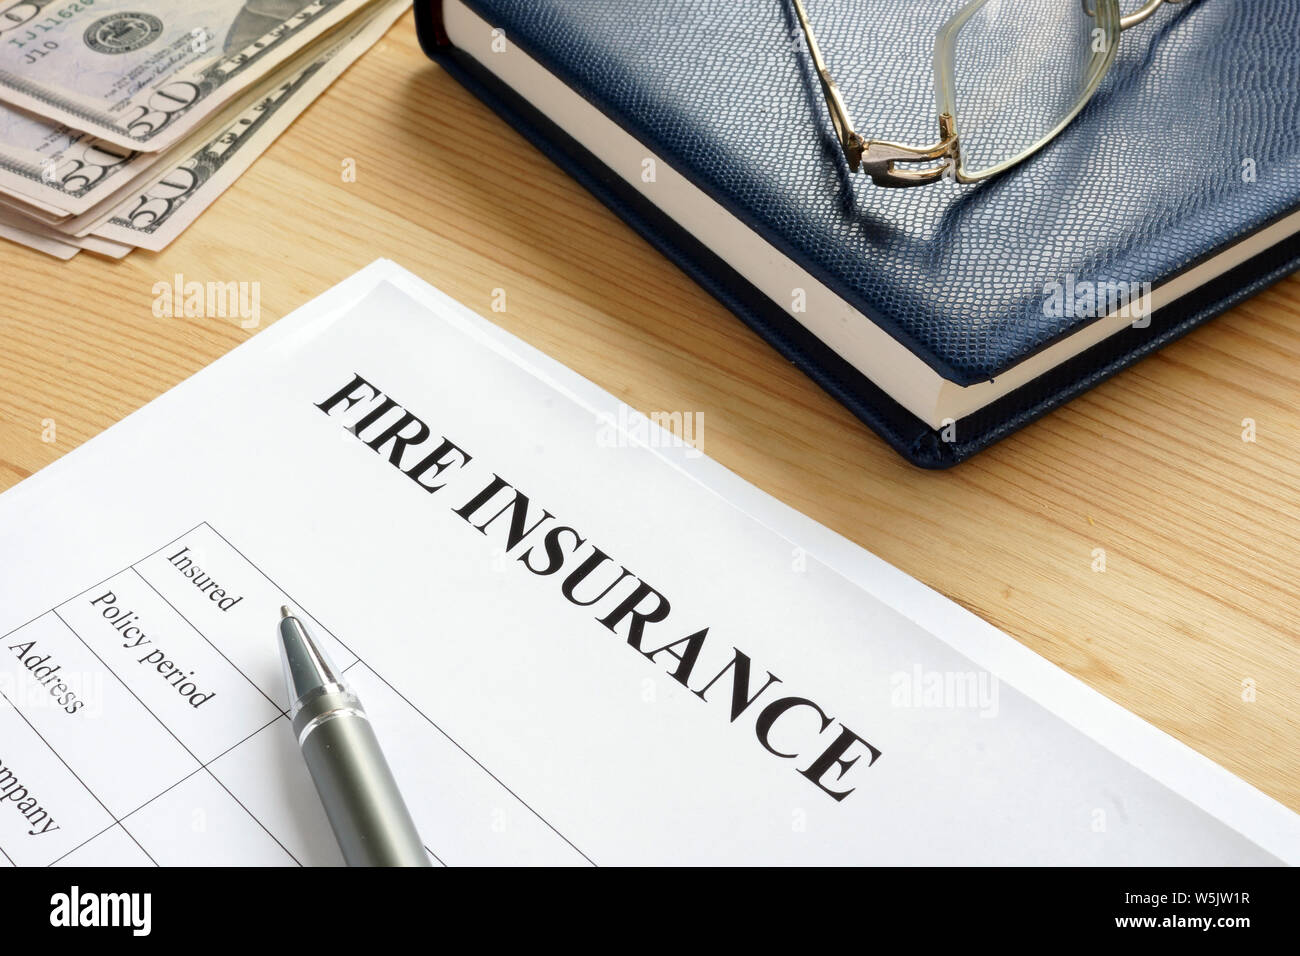 Fire insurance agreement with pen and money. Stock Photo